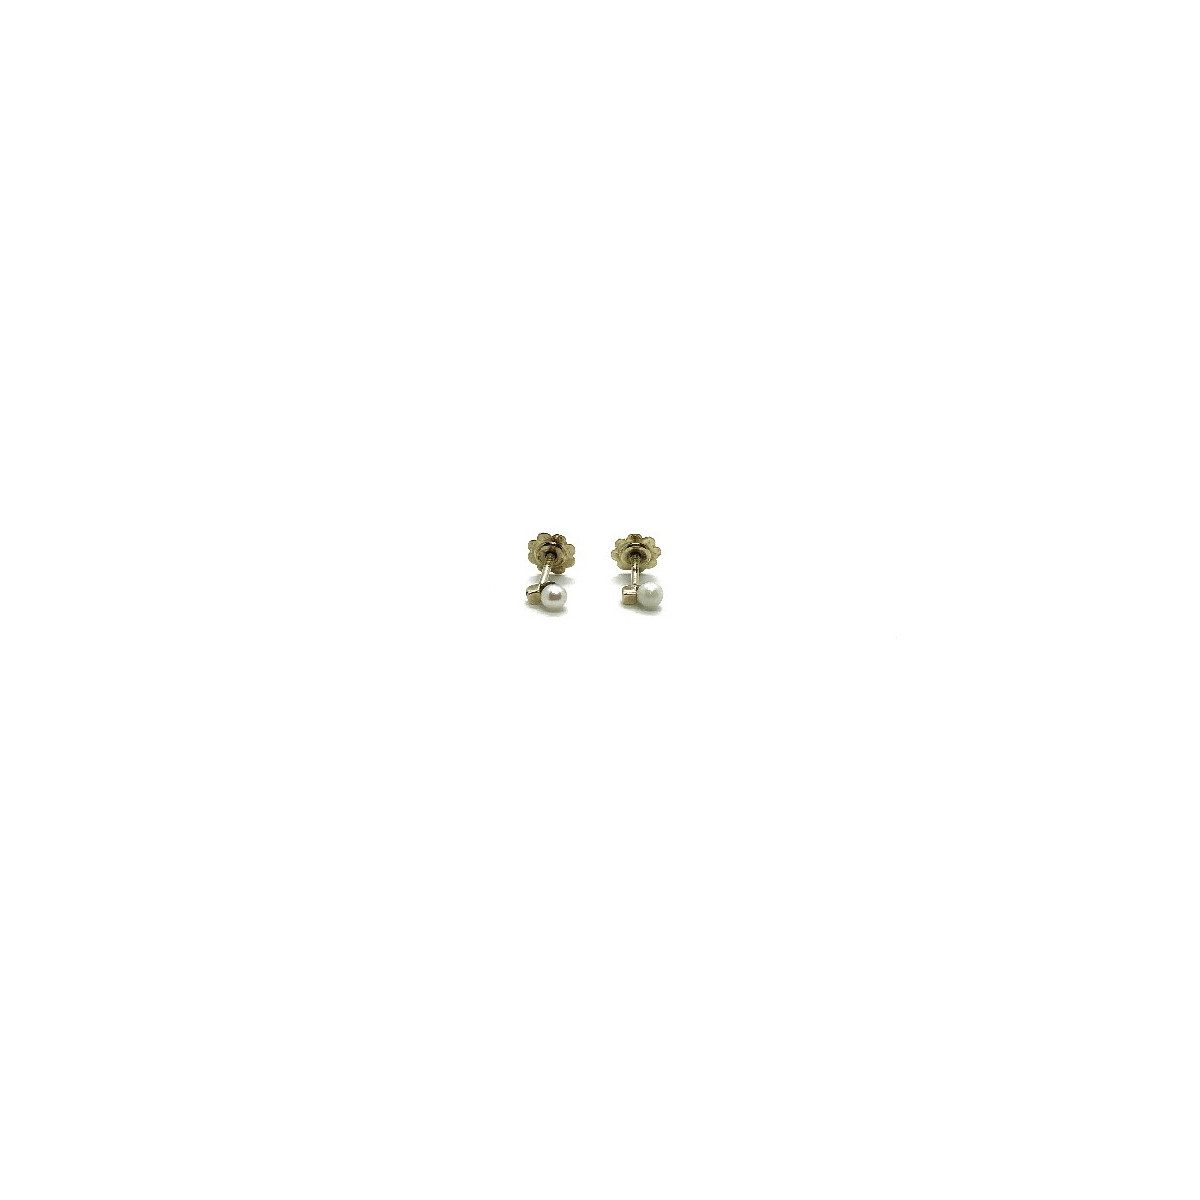 BABY CLIMENT 1890 EARRINGS - D-1026RP/PC